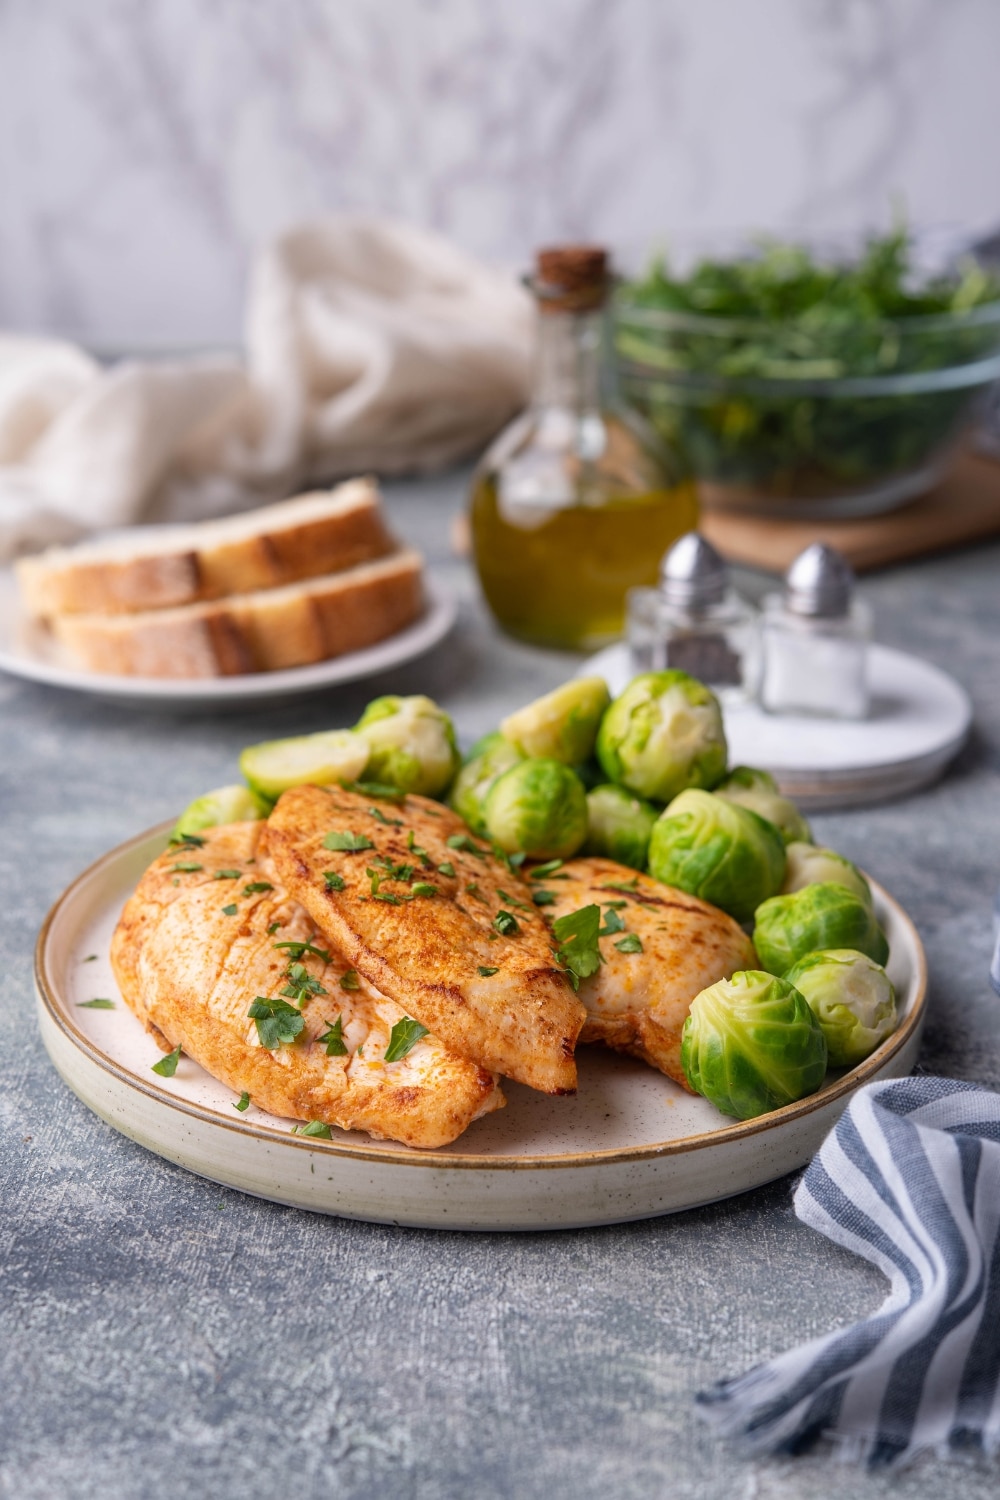 Sauteed chicken breasts garnished with herbs on a plate with steamed brussel sprouts. On the same table is a striped tea towel, a plate of sliced bread, a bottle of olive oil, salt and pepper shakers, and a glass bowl filled with greens.